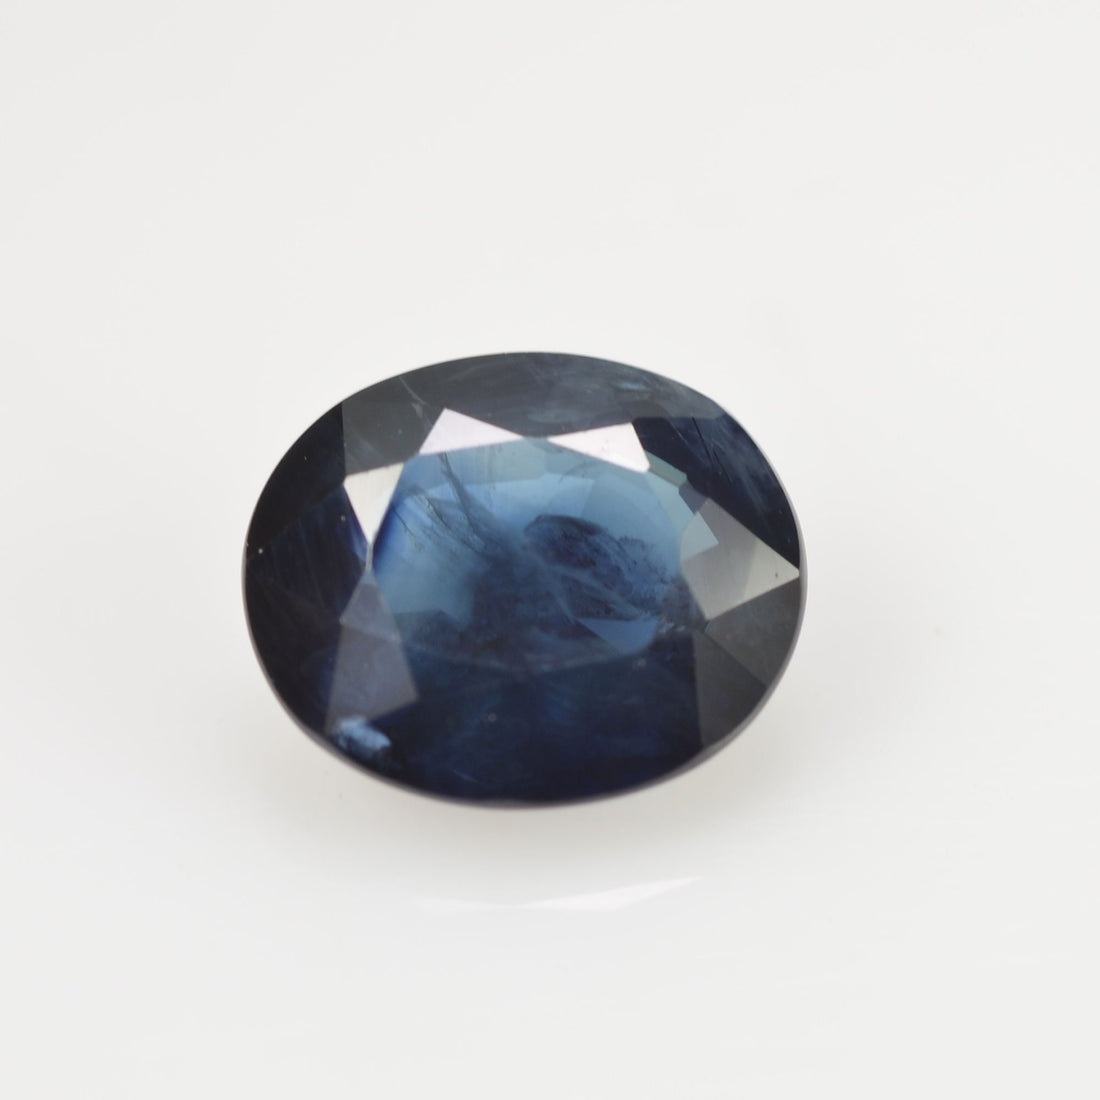 1.13 Cts Natural Blue Sapphire Loose Gemstone Oval Cut